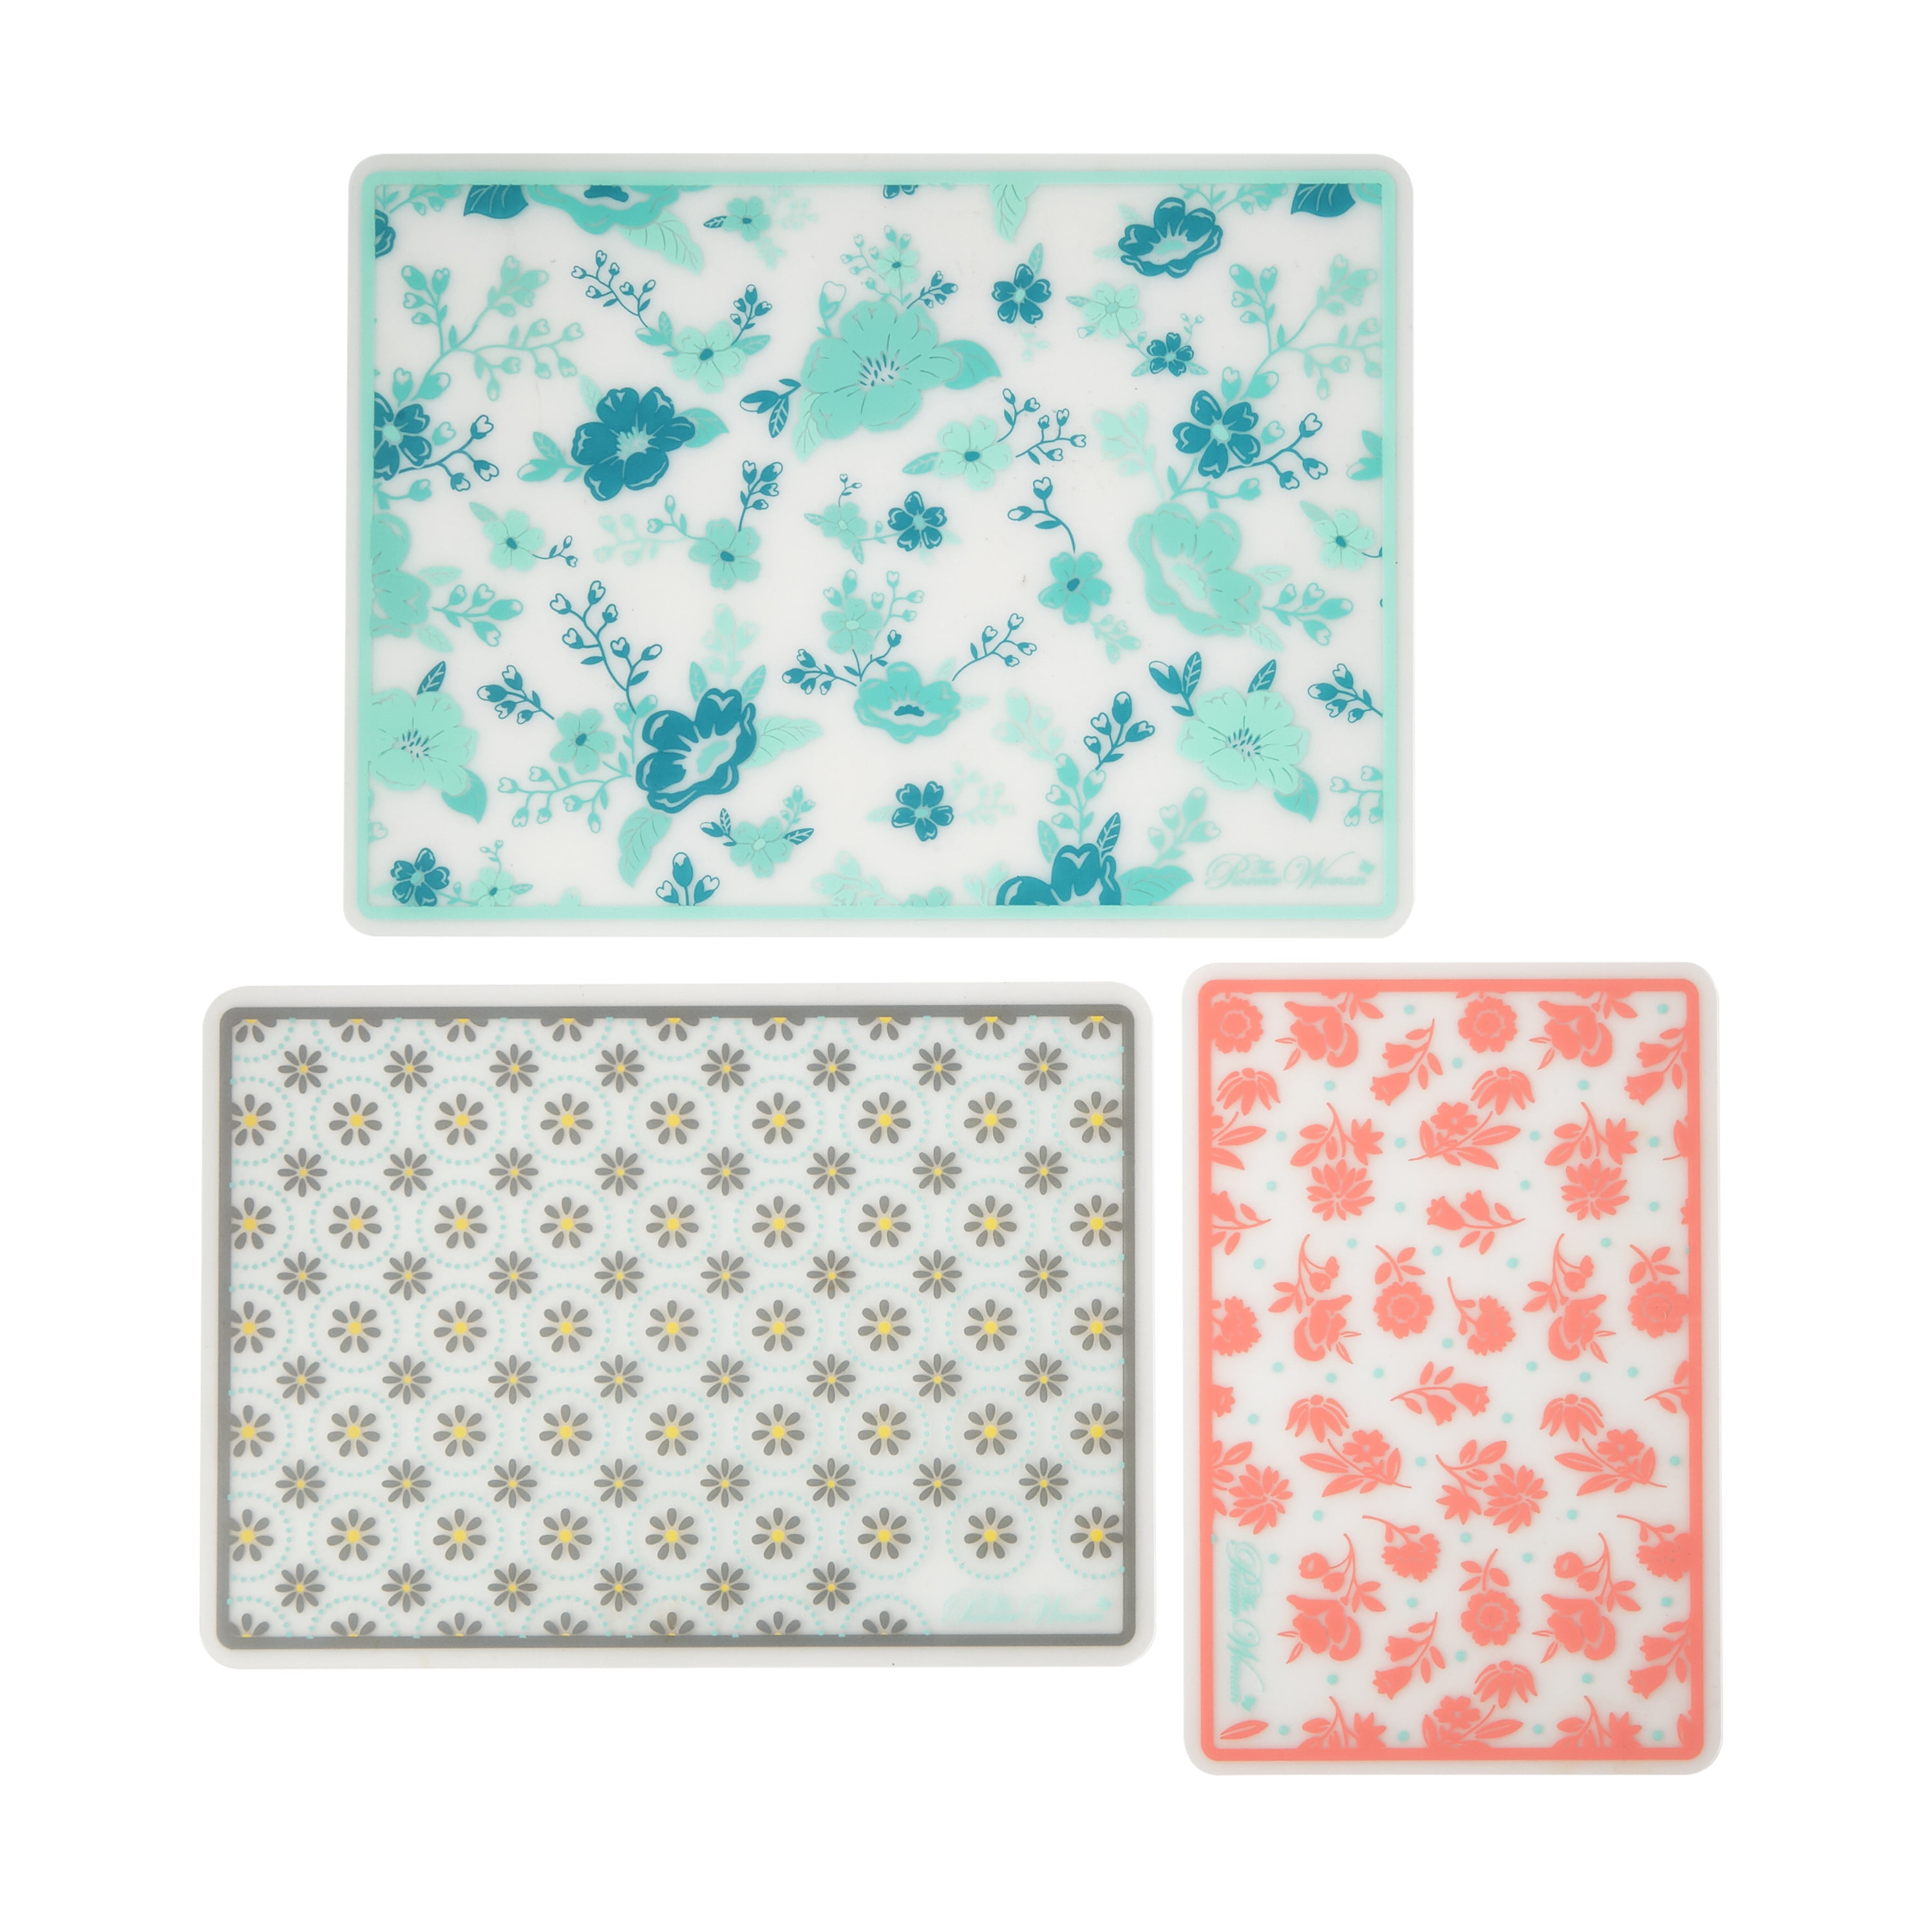 NEW PIONEER WOMAN SILICONE BAKING MAT ~ CHOOSE YOUR PATTERN!